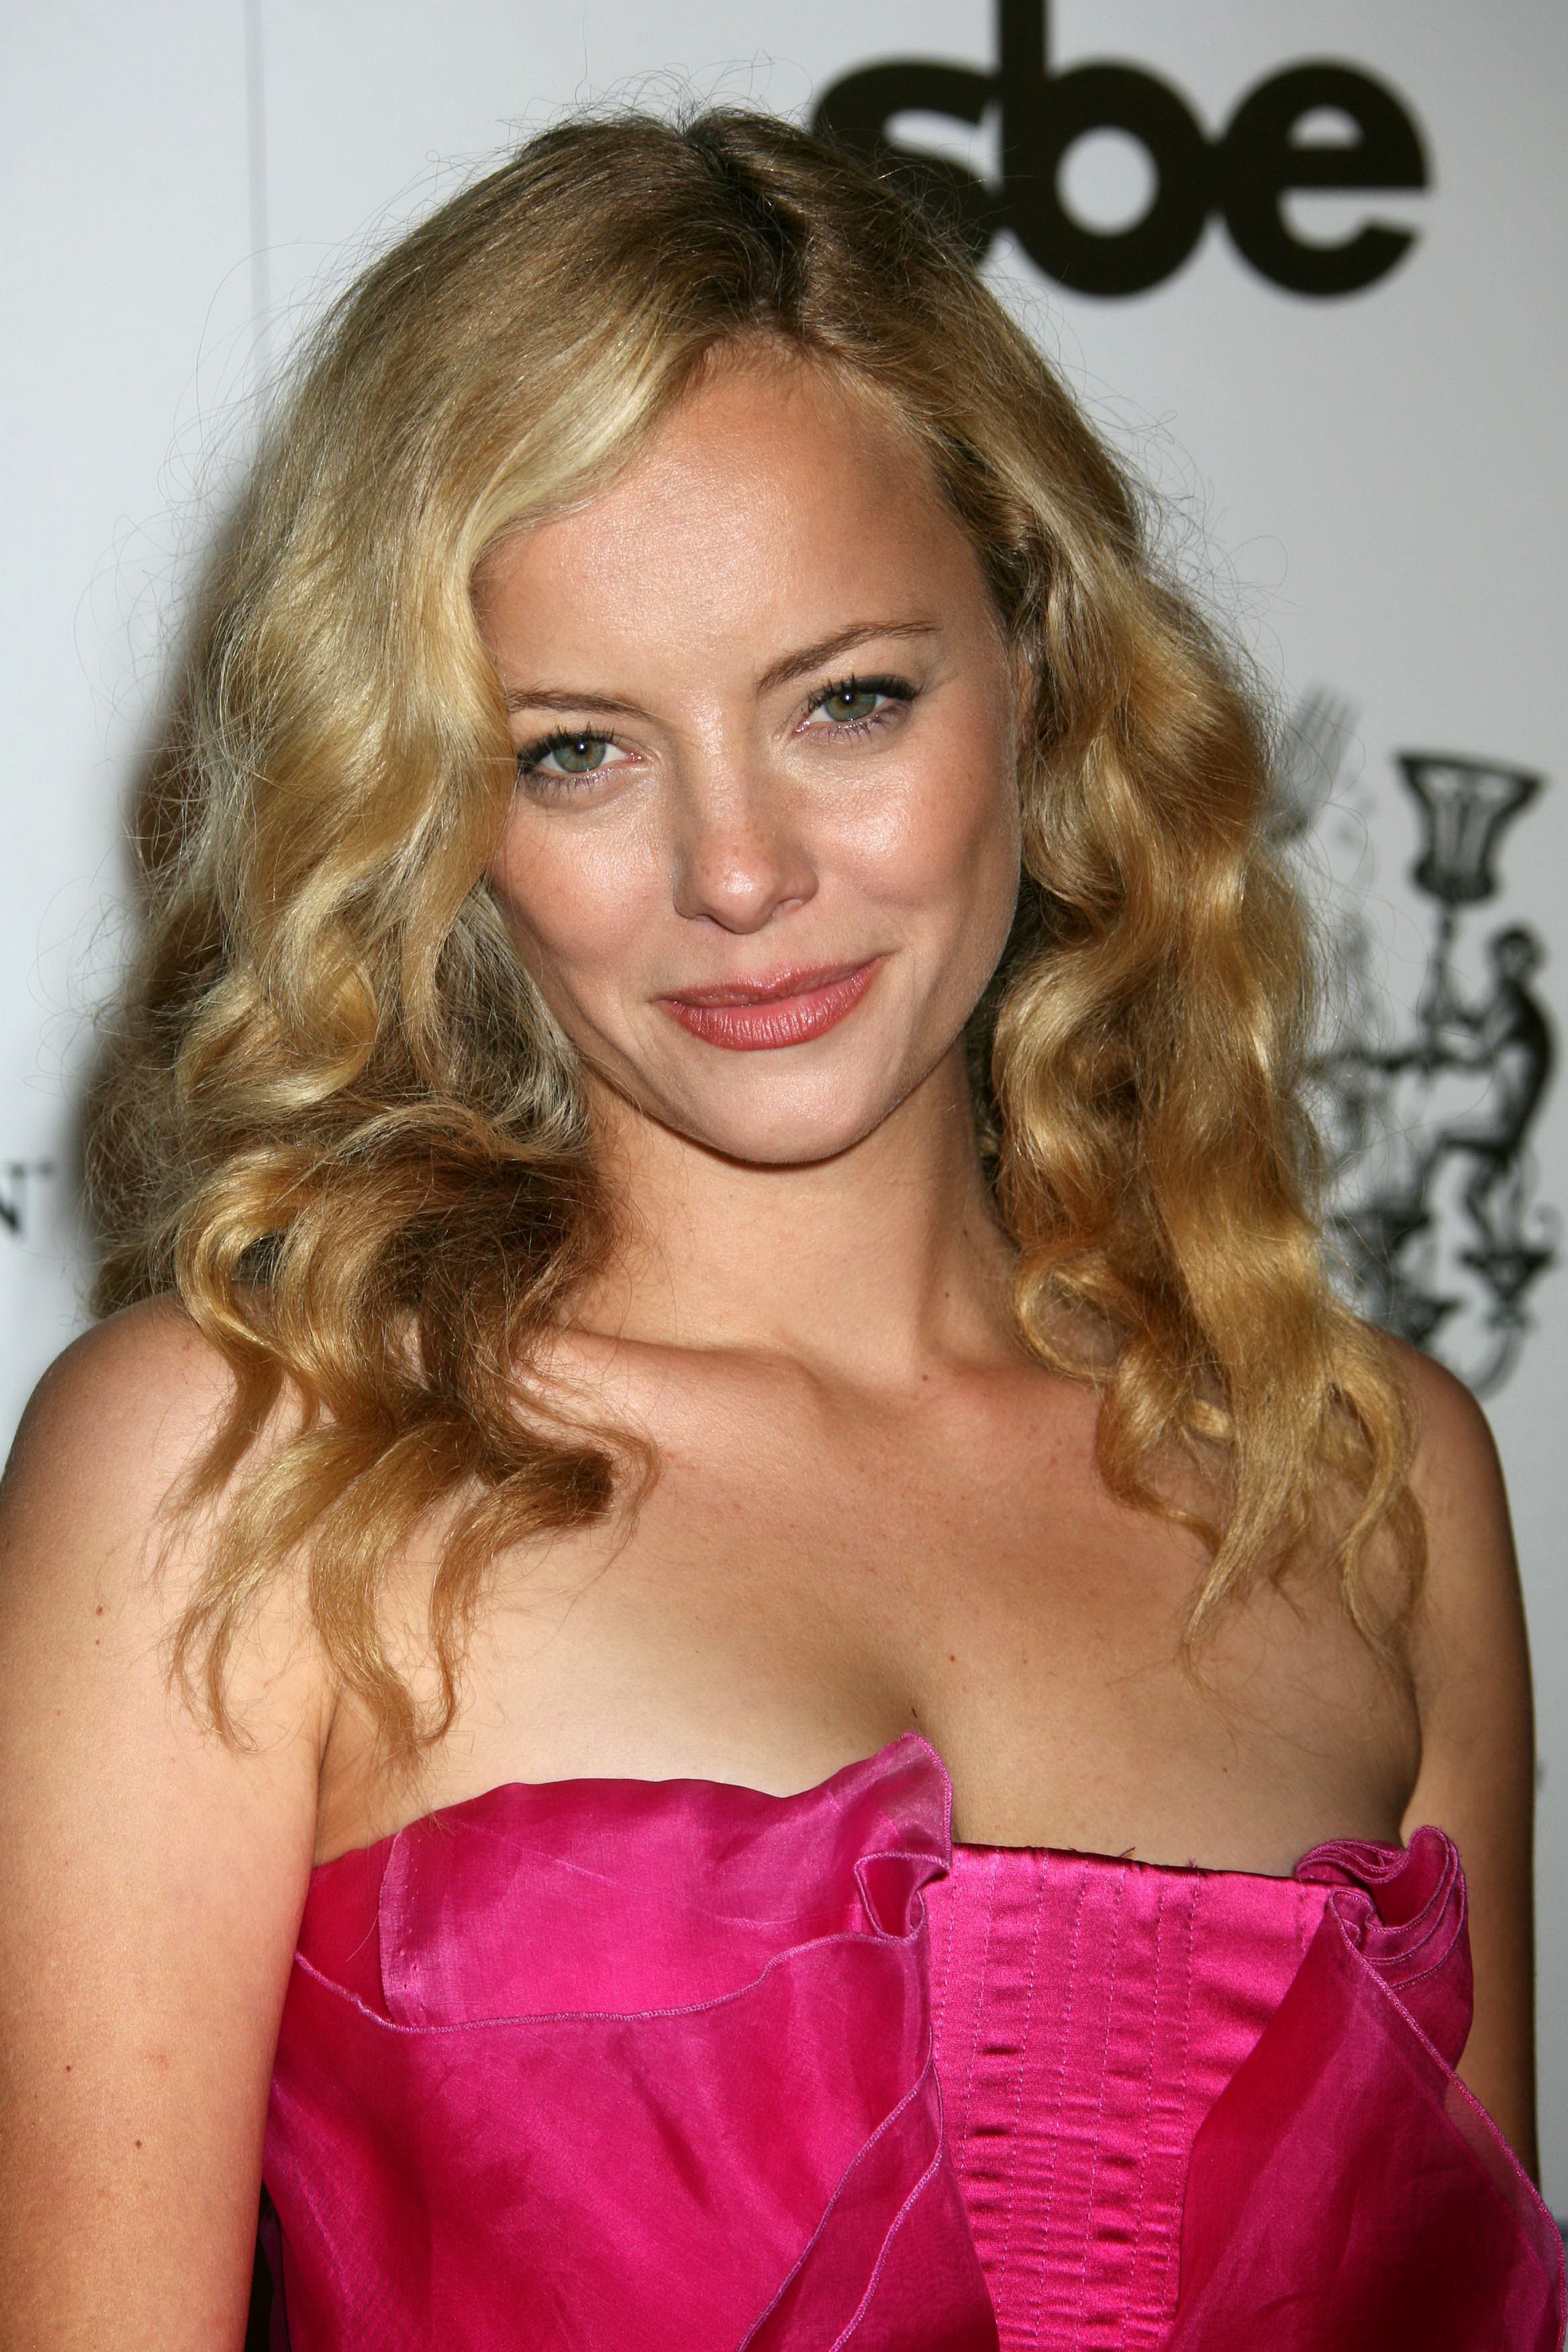 Bijou Phillips Hospitalized After Quietly Dealing With 